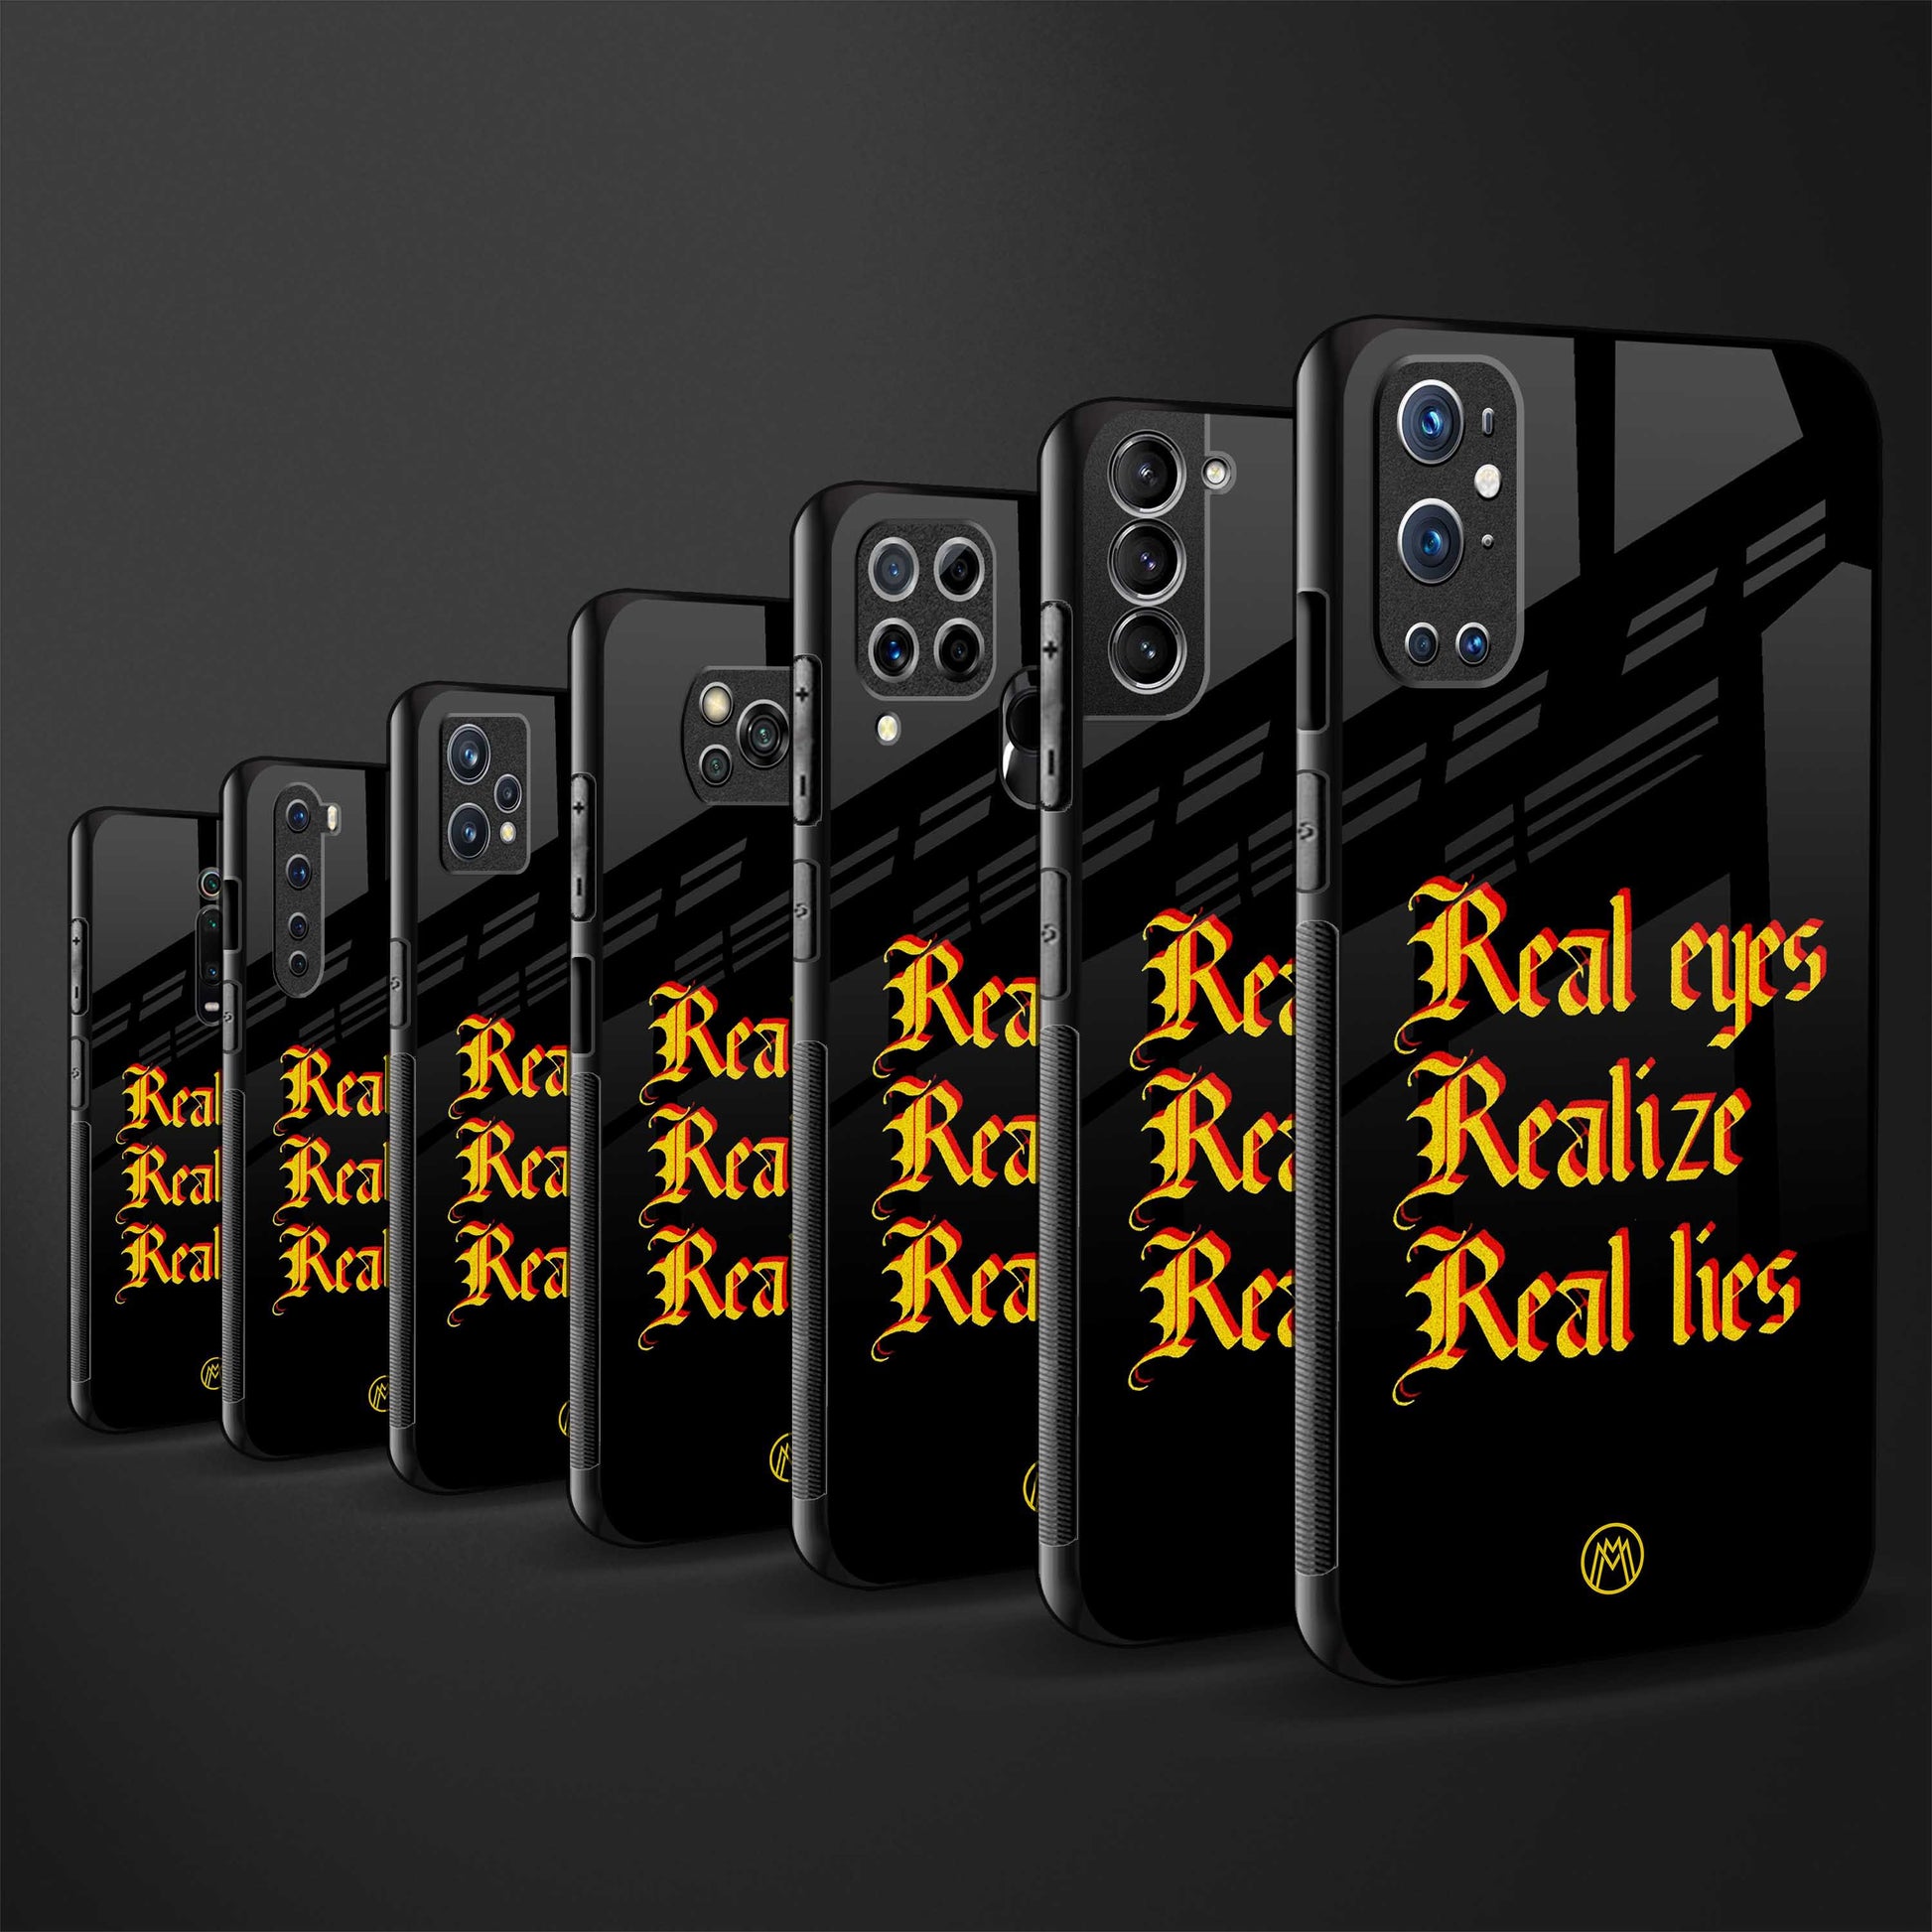 real eyes realize real lies quote glass case for iphone 12 pro max image-3